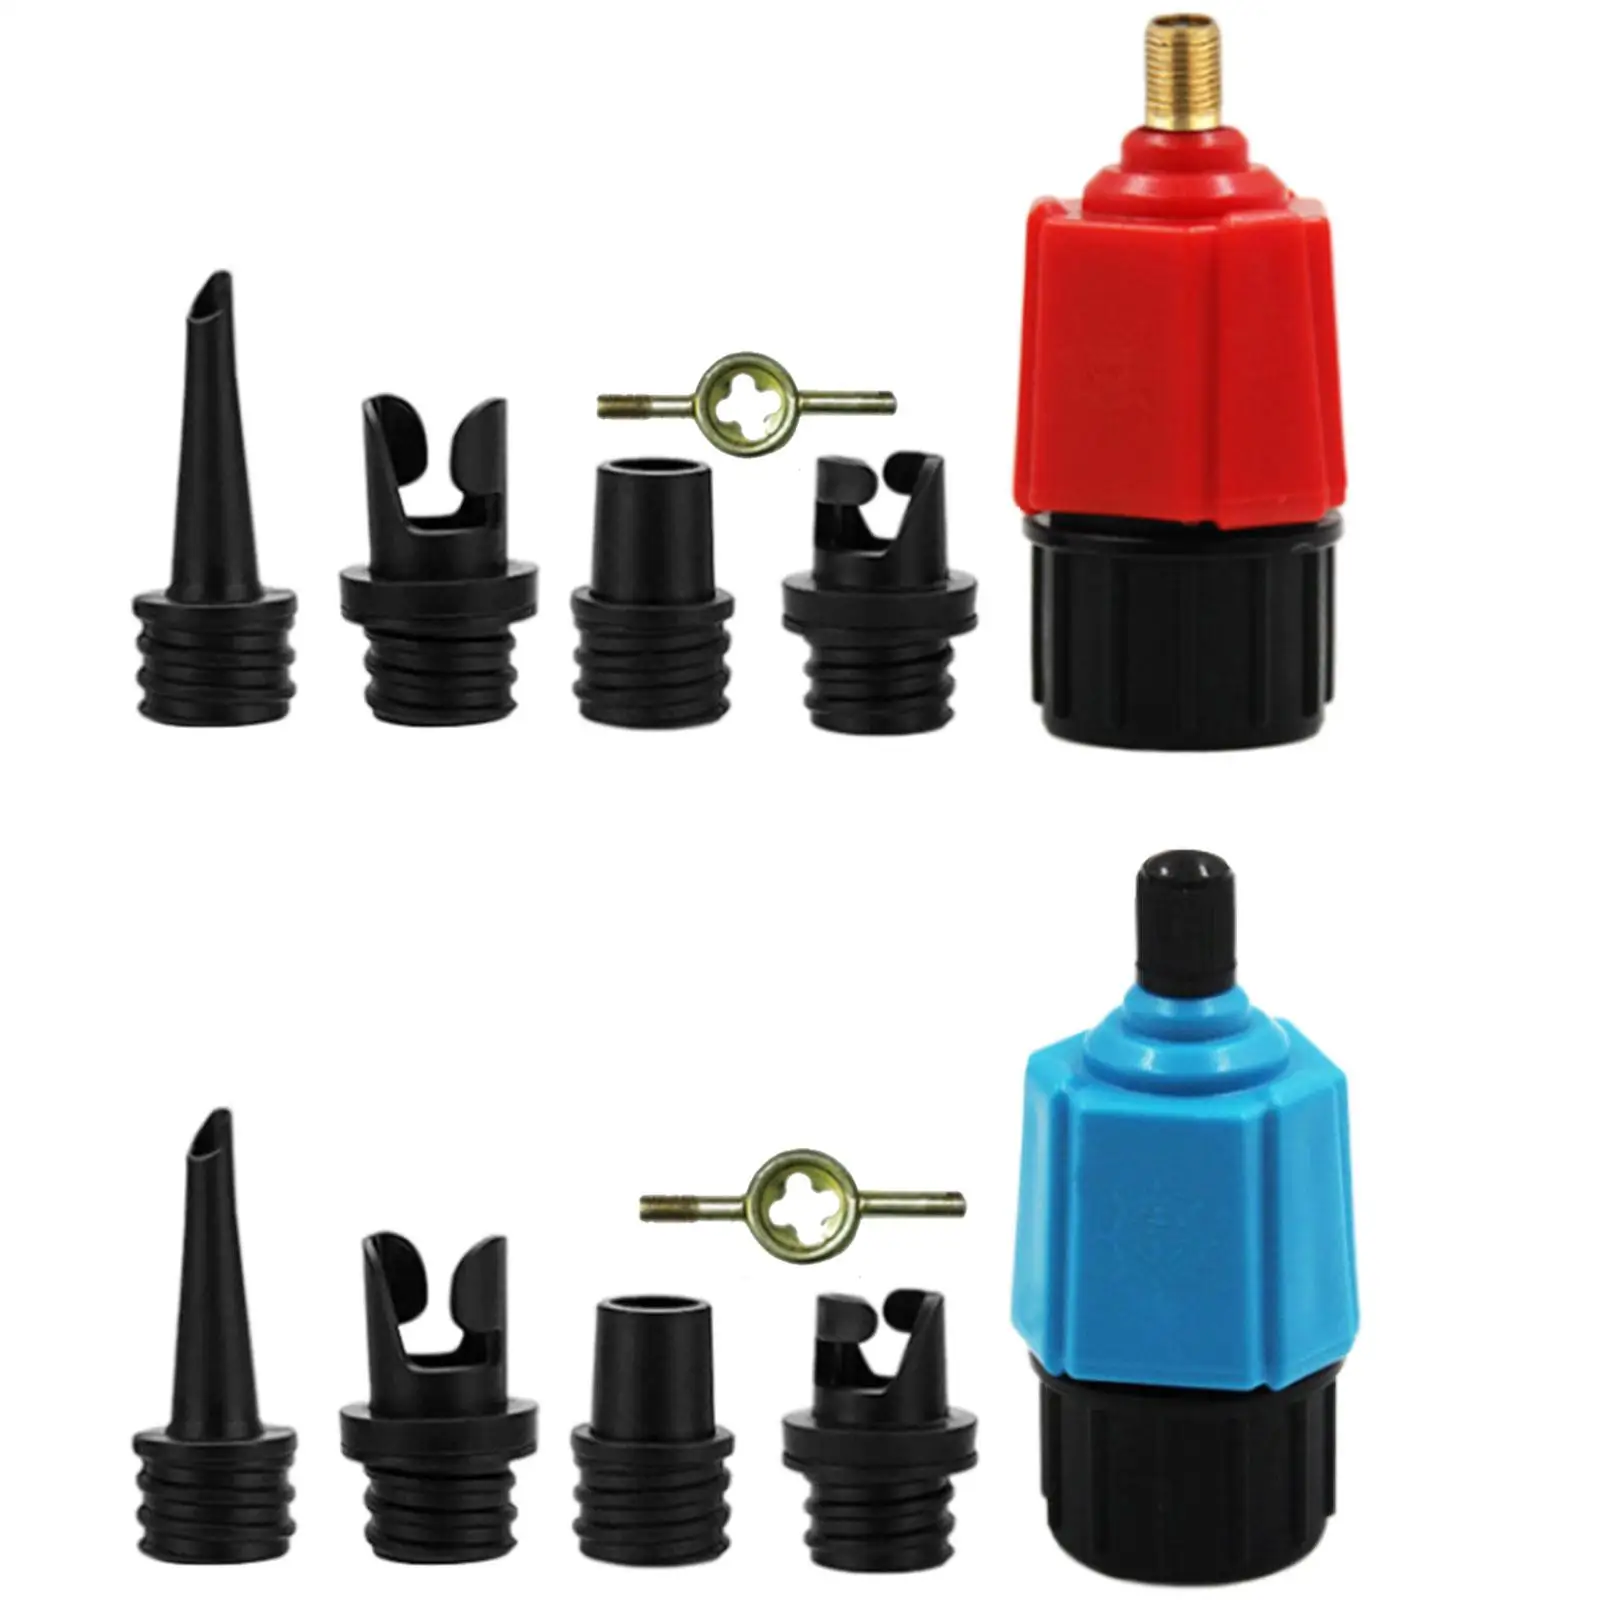 5 Pieces Pump Adaptor Inflatable Connector Replacement Boat Pump Adaptor